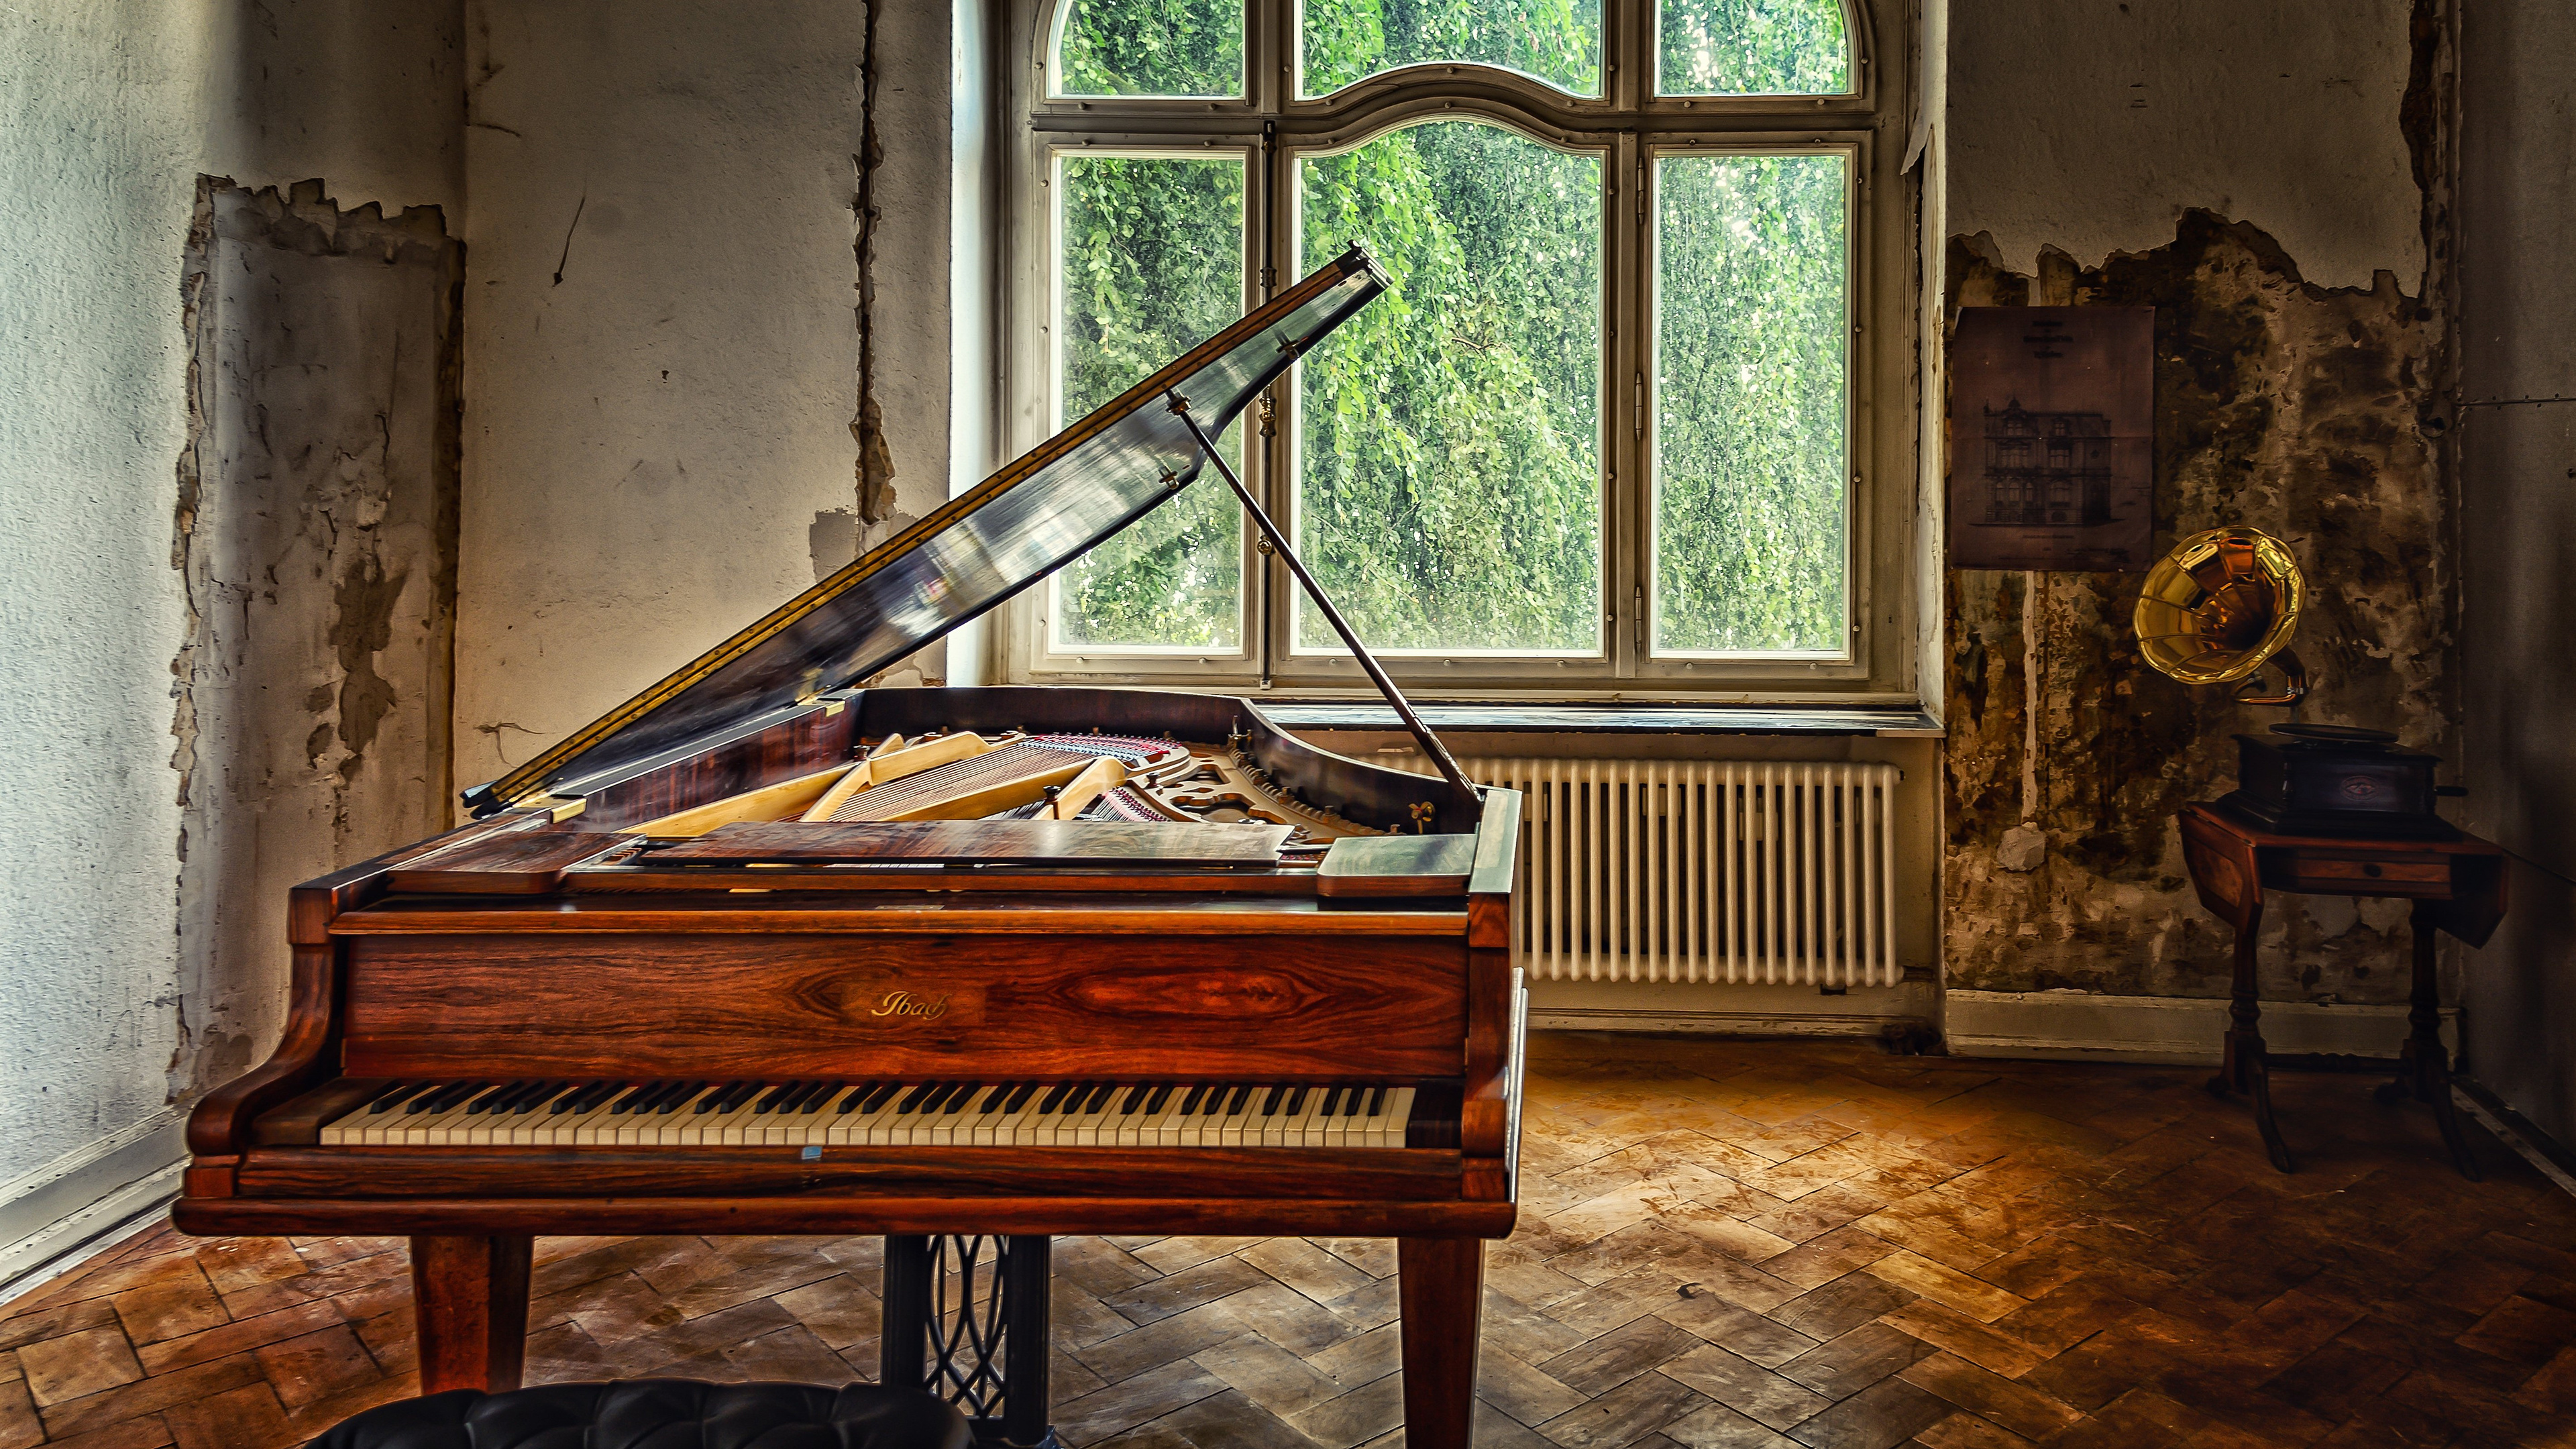 Fortepiano: Keyboard Instrument, A Pedal Clavier, Music Room, Contrast Between Old And New. 3840x2160 4K Wallpaper.